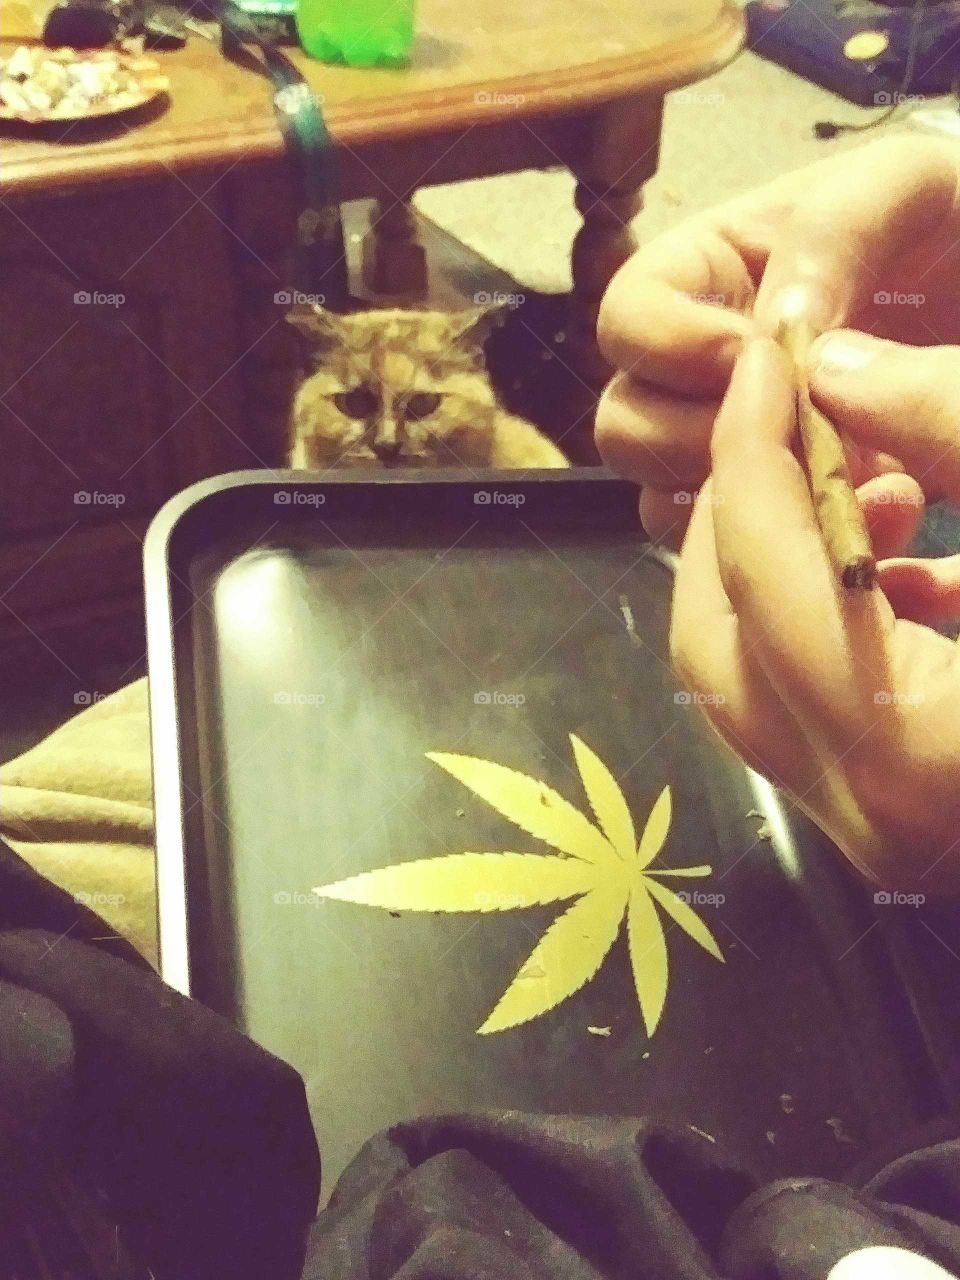 cat wants to blaze up